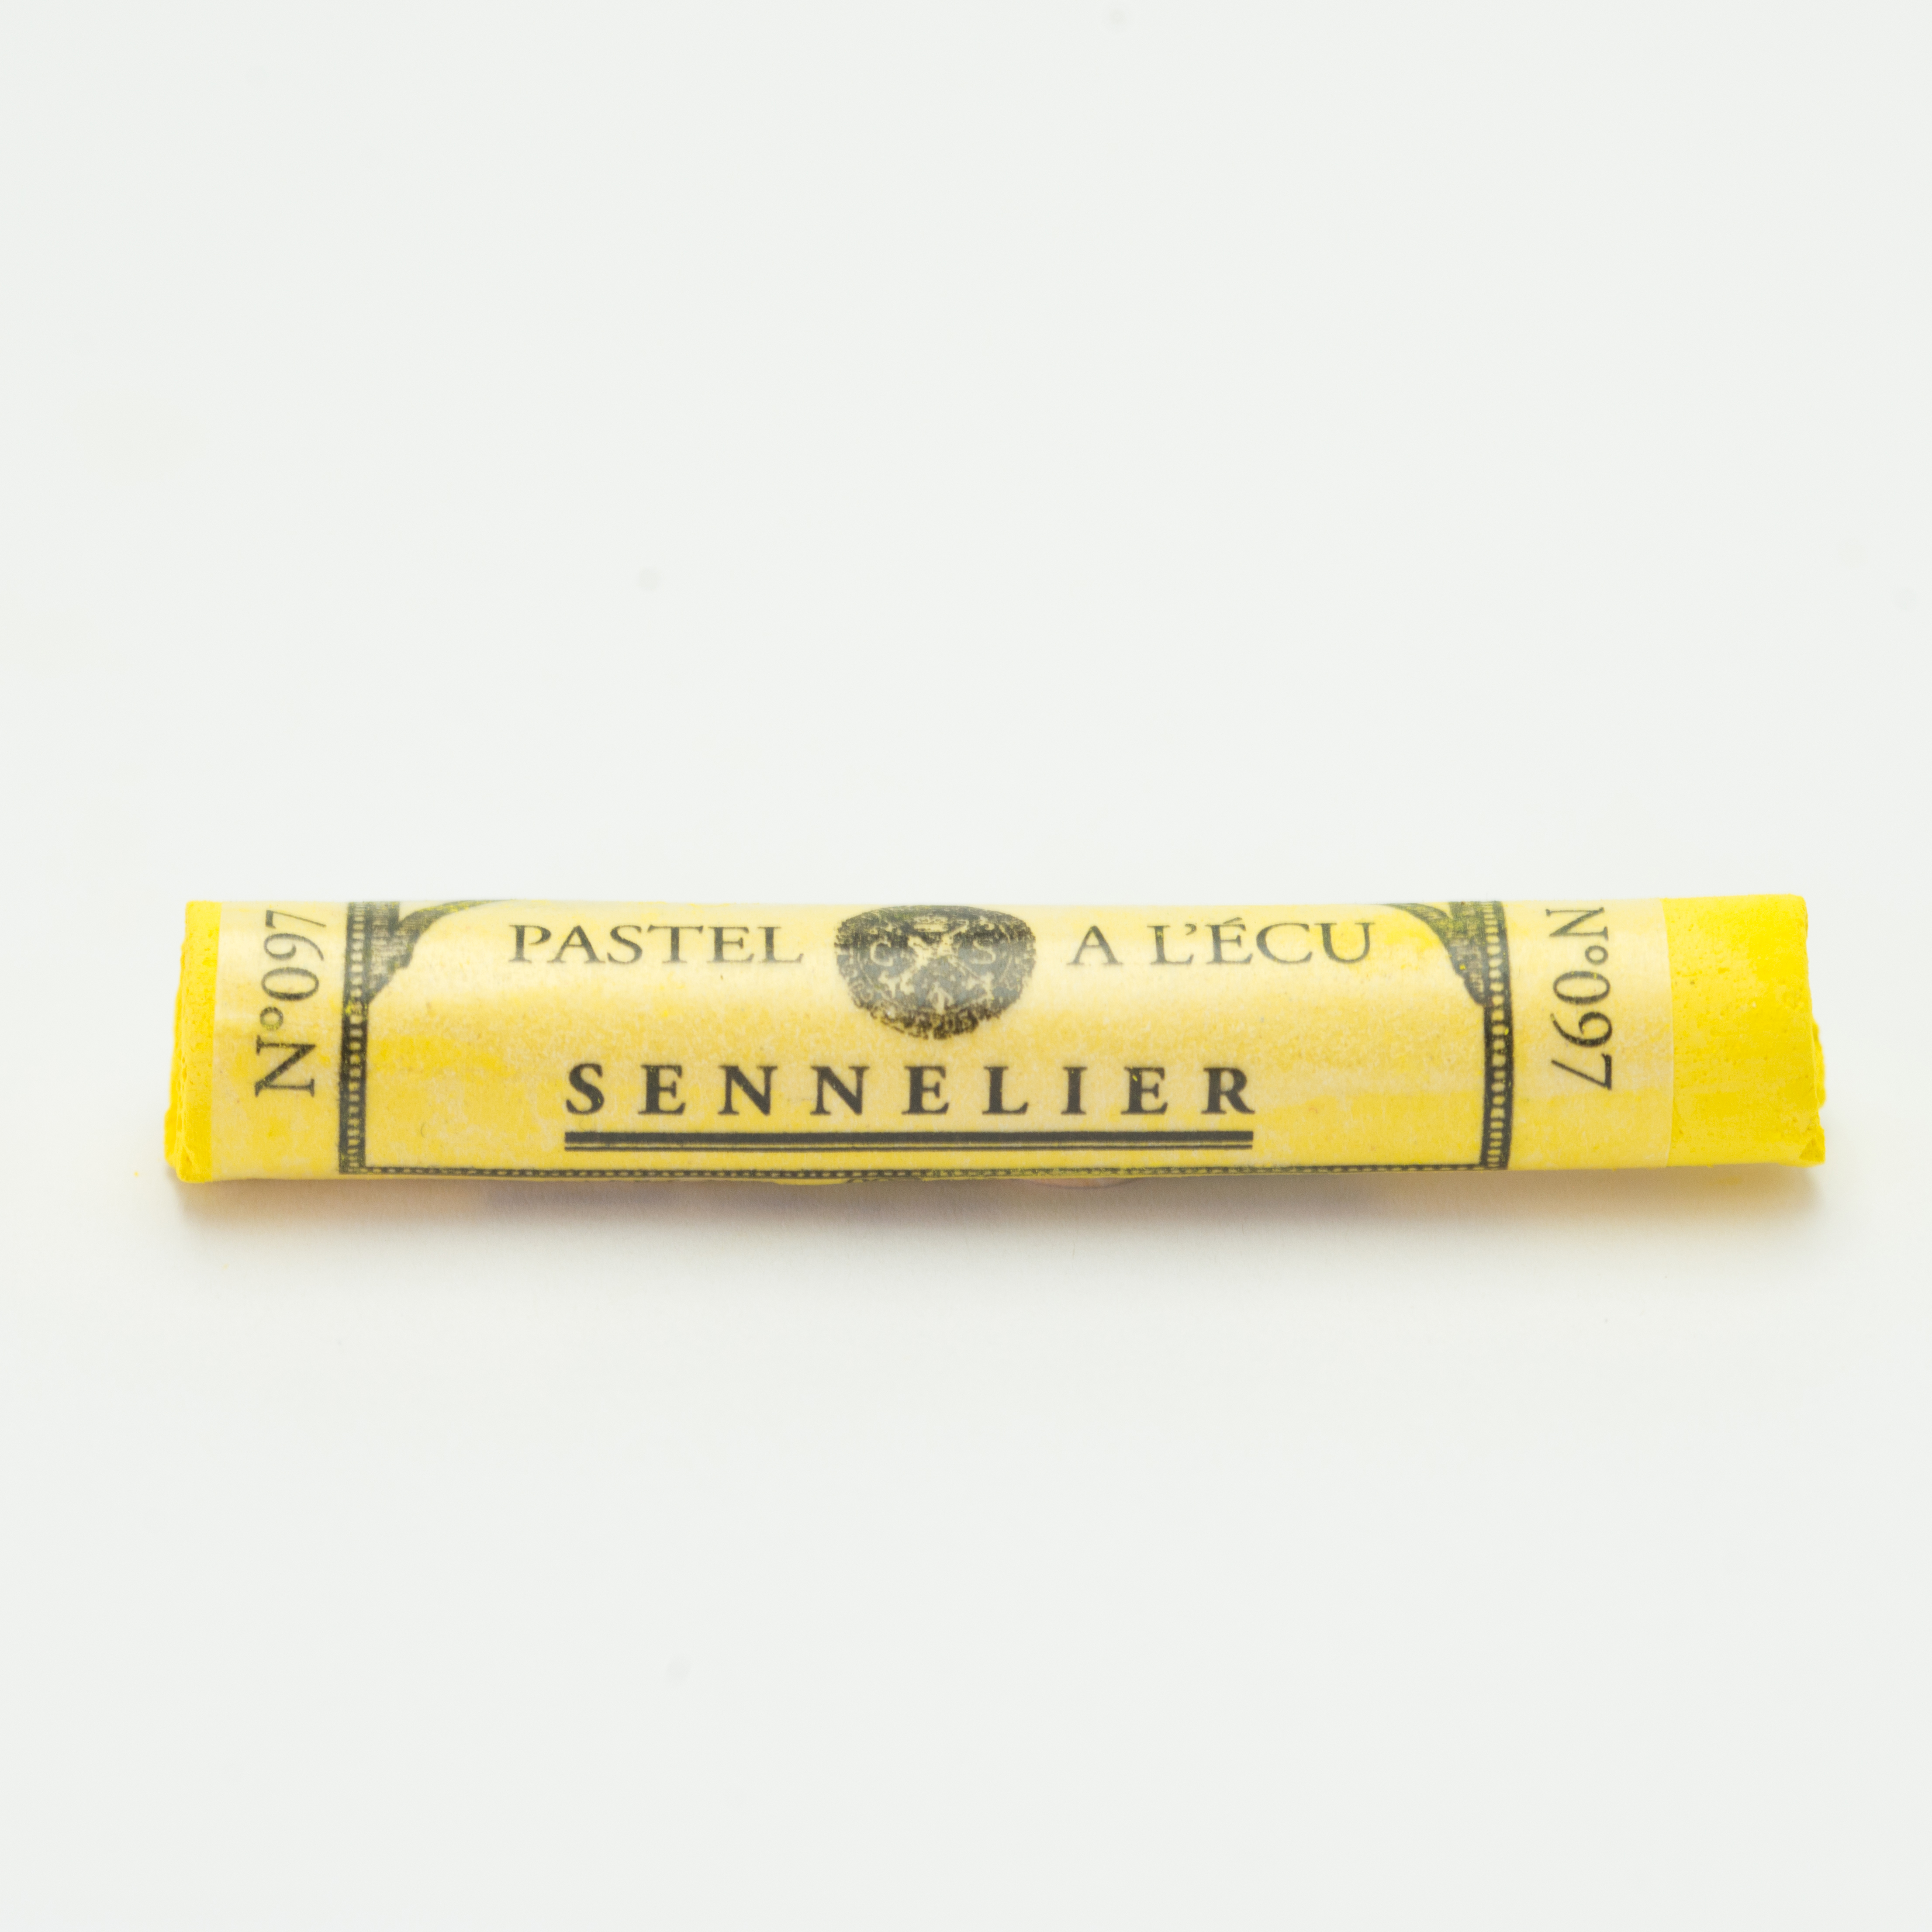 Sennelier Extra Soft Pastels - Naples Yellow 97